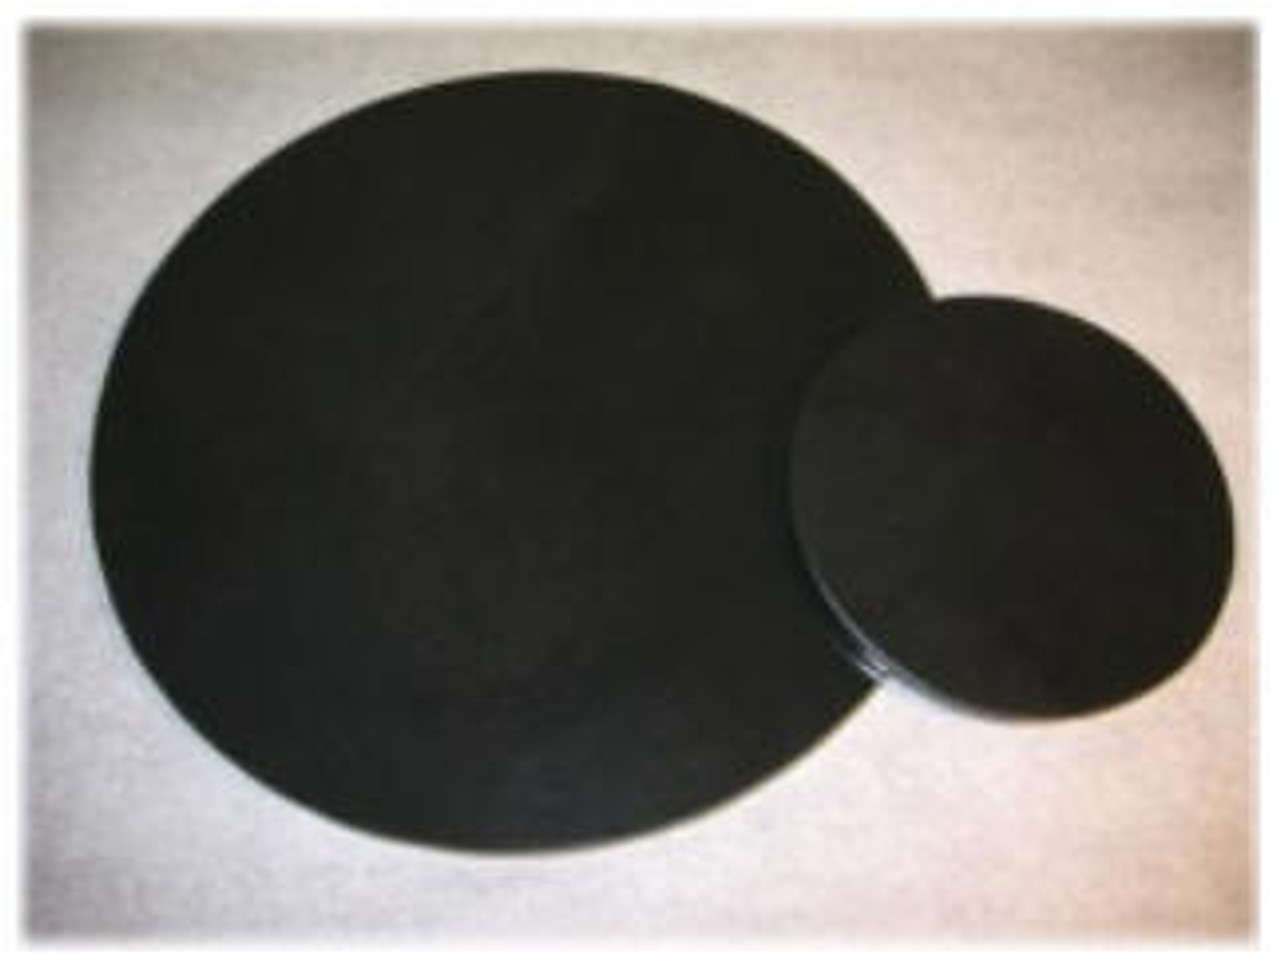 M-AB-6DiaASP: LaserGrade Absolute Black Marble, 6" Round  x 7mm,  All Surfaces Polished, (6F) 